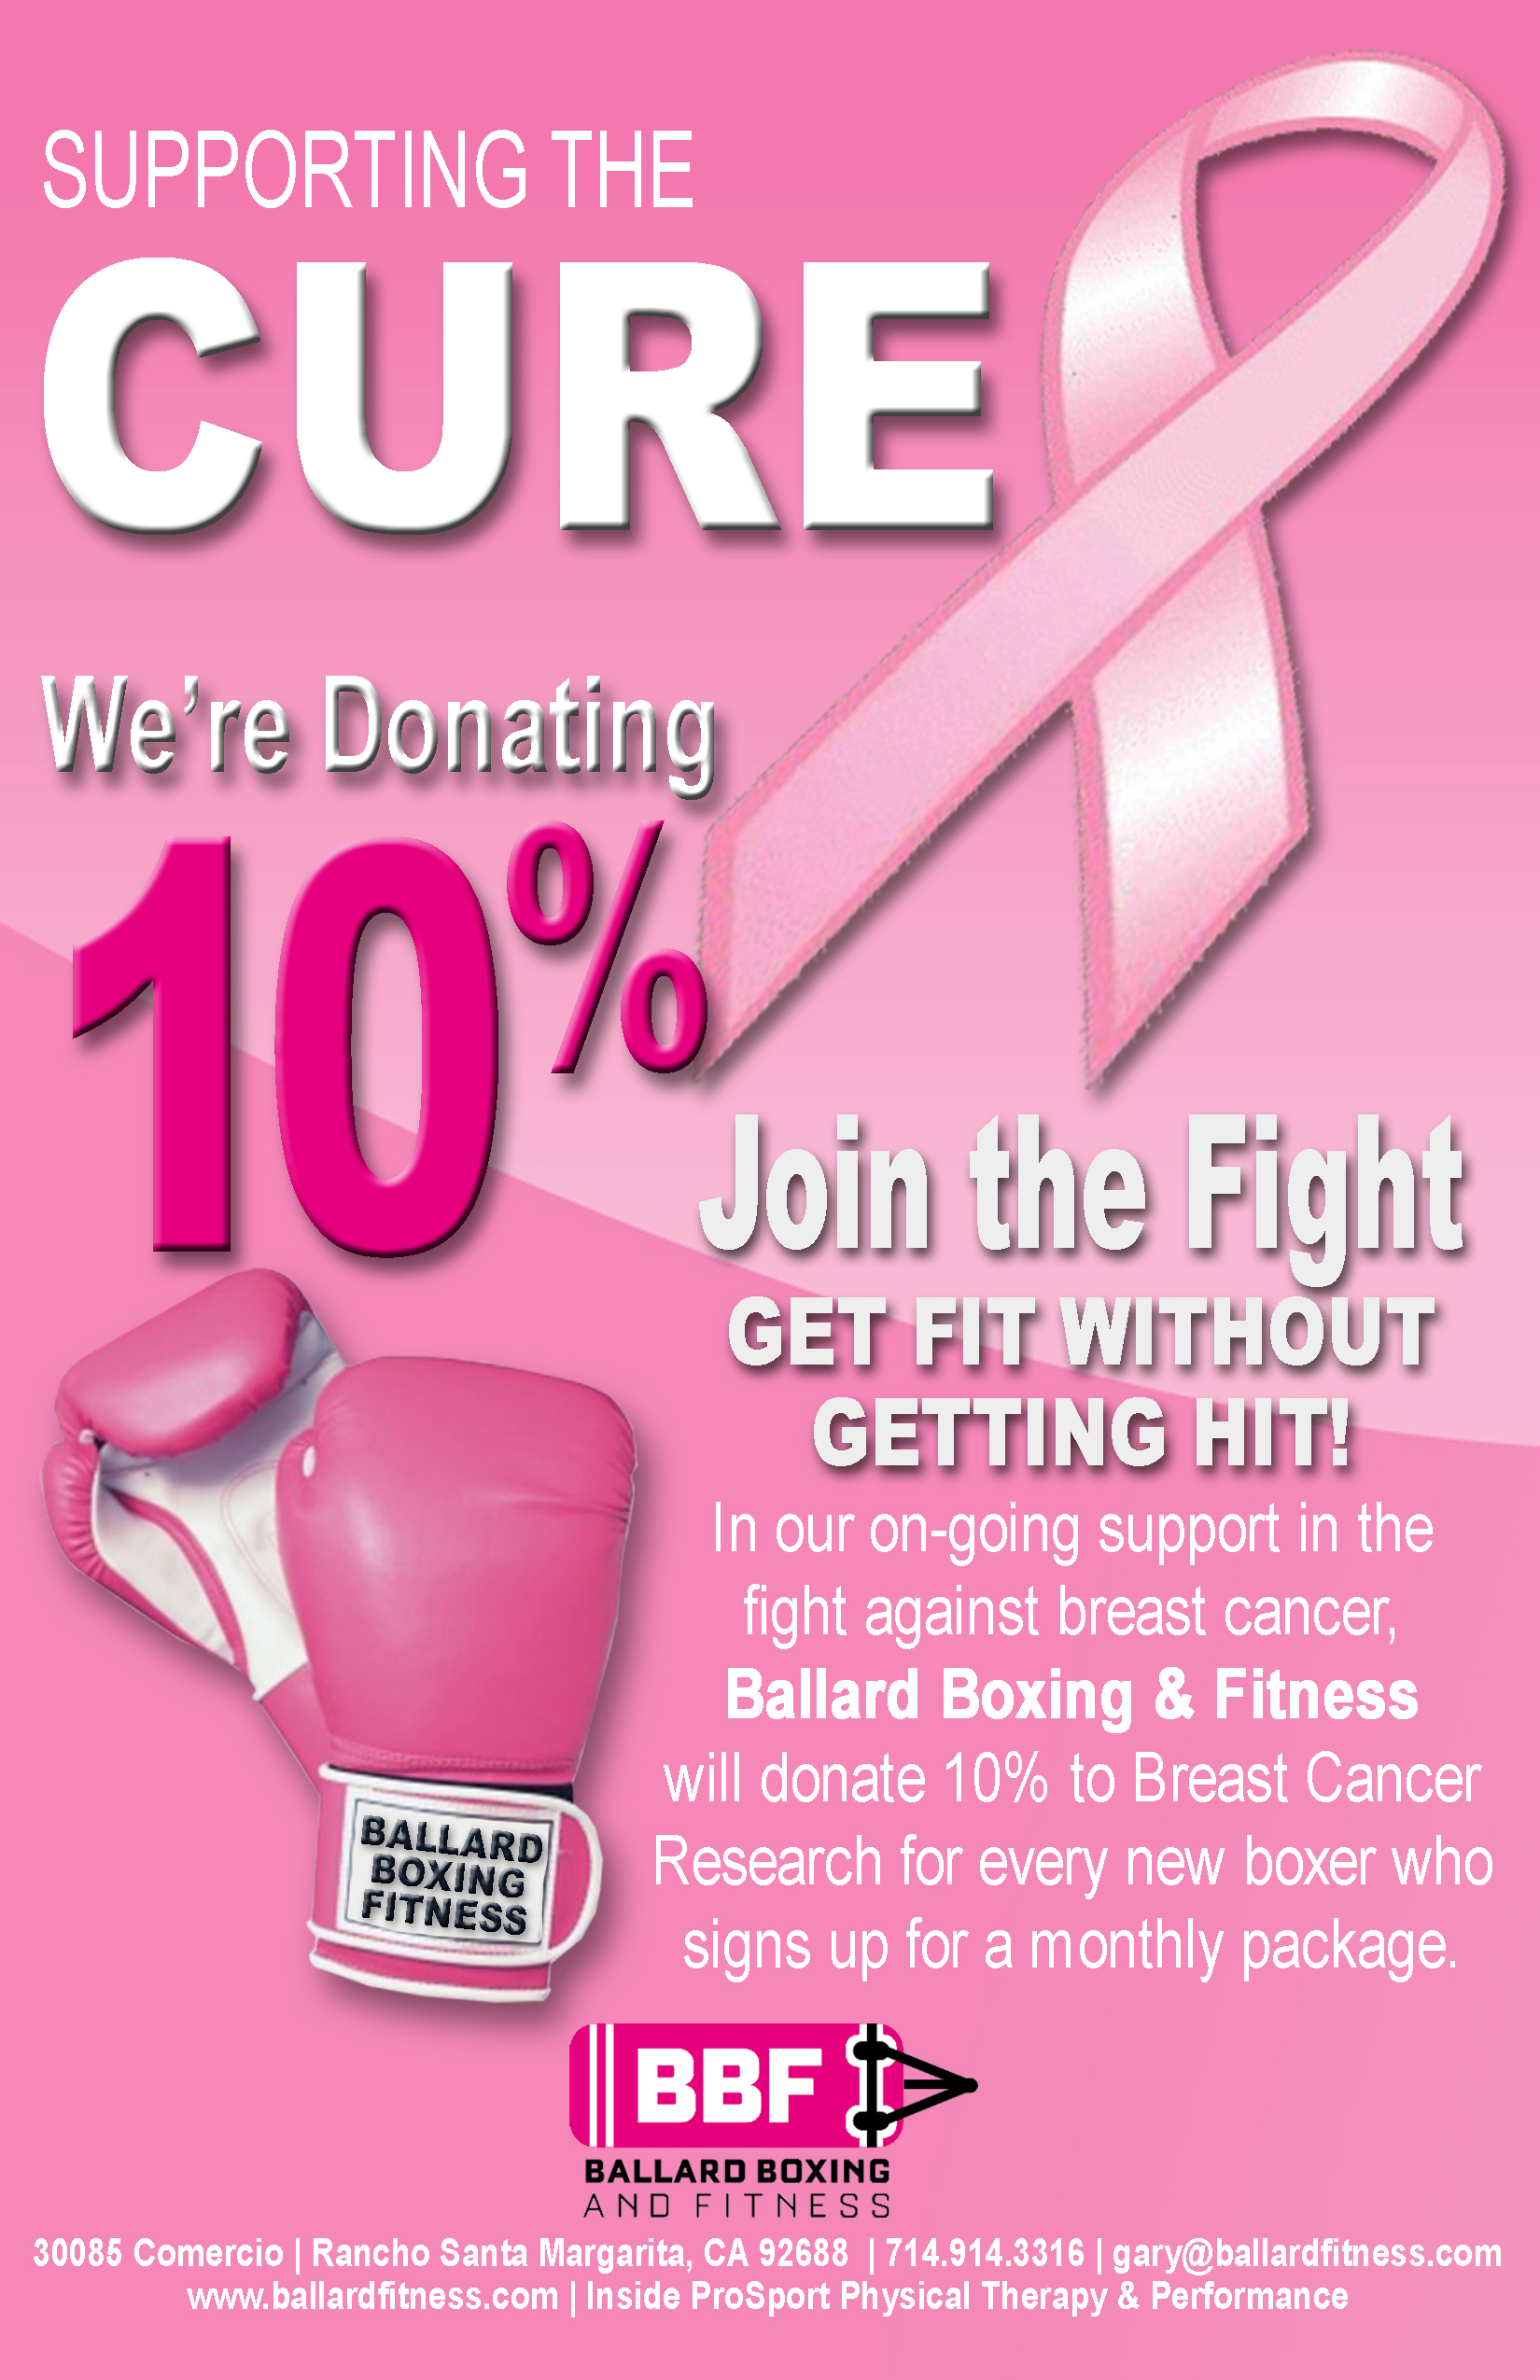 Joining the Fight Against Breast Cancer